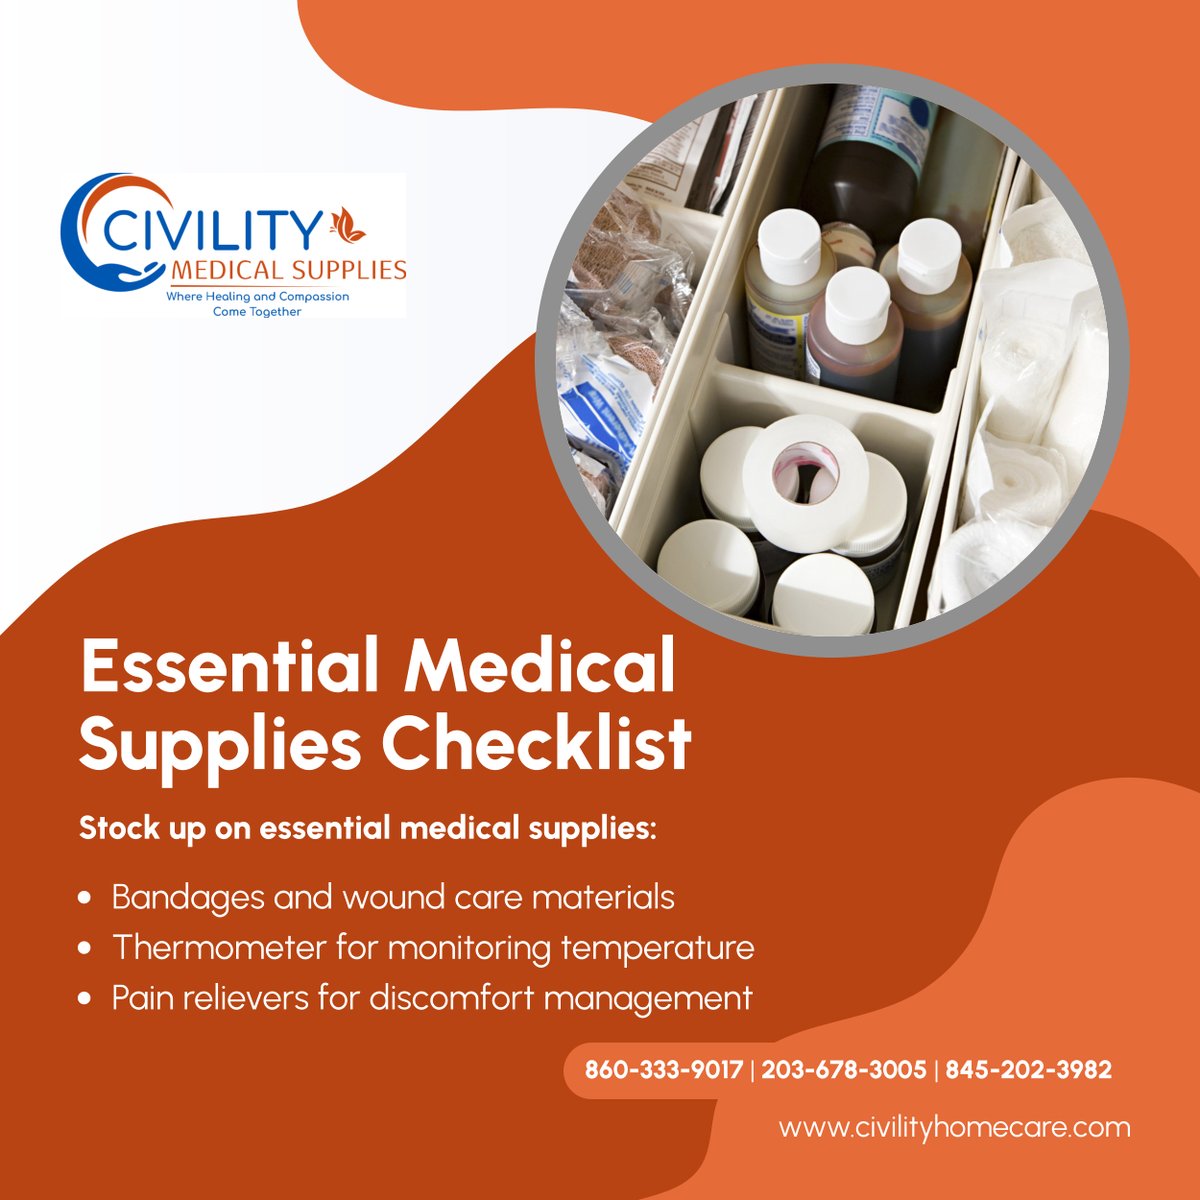 Be prepared for any situation with these must-have medical supplies! 

Ensure your home is equipped for minor emergencies and everyday health needs. 

#MedicalSupplies #HomeCare #EmergencyPreparedness #BrewsterNY #HomeCareAndMedicalSupplies